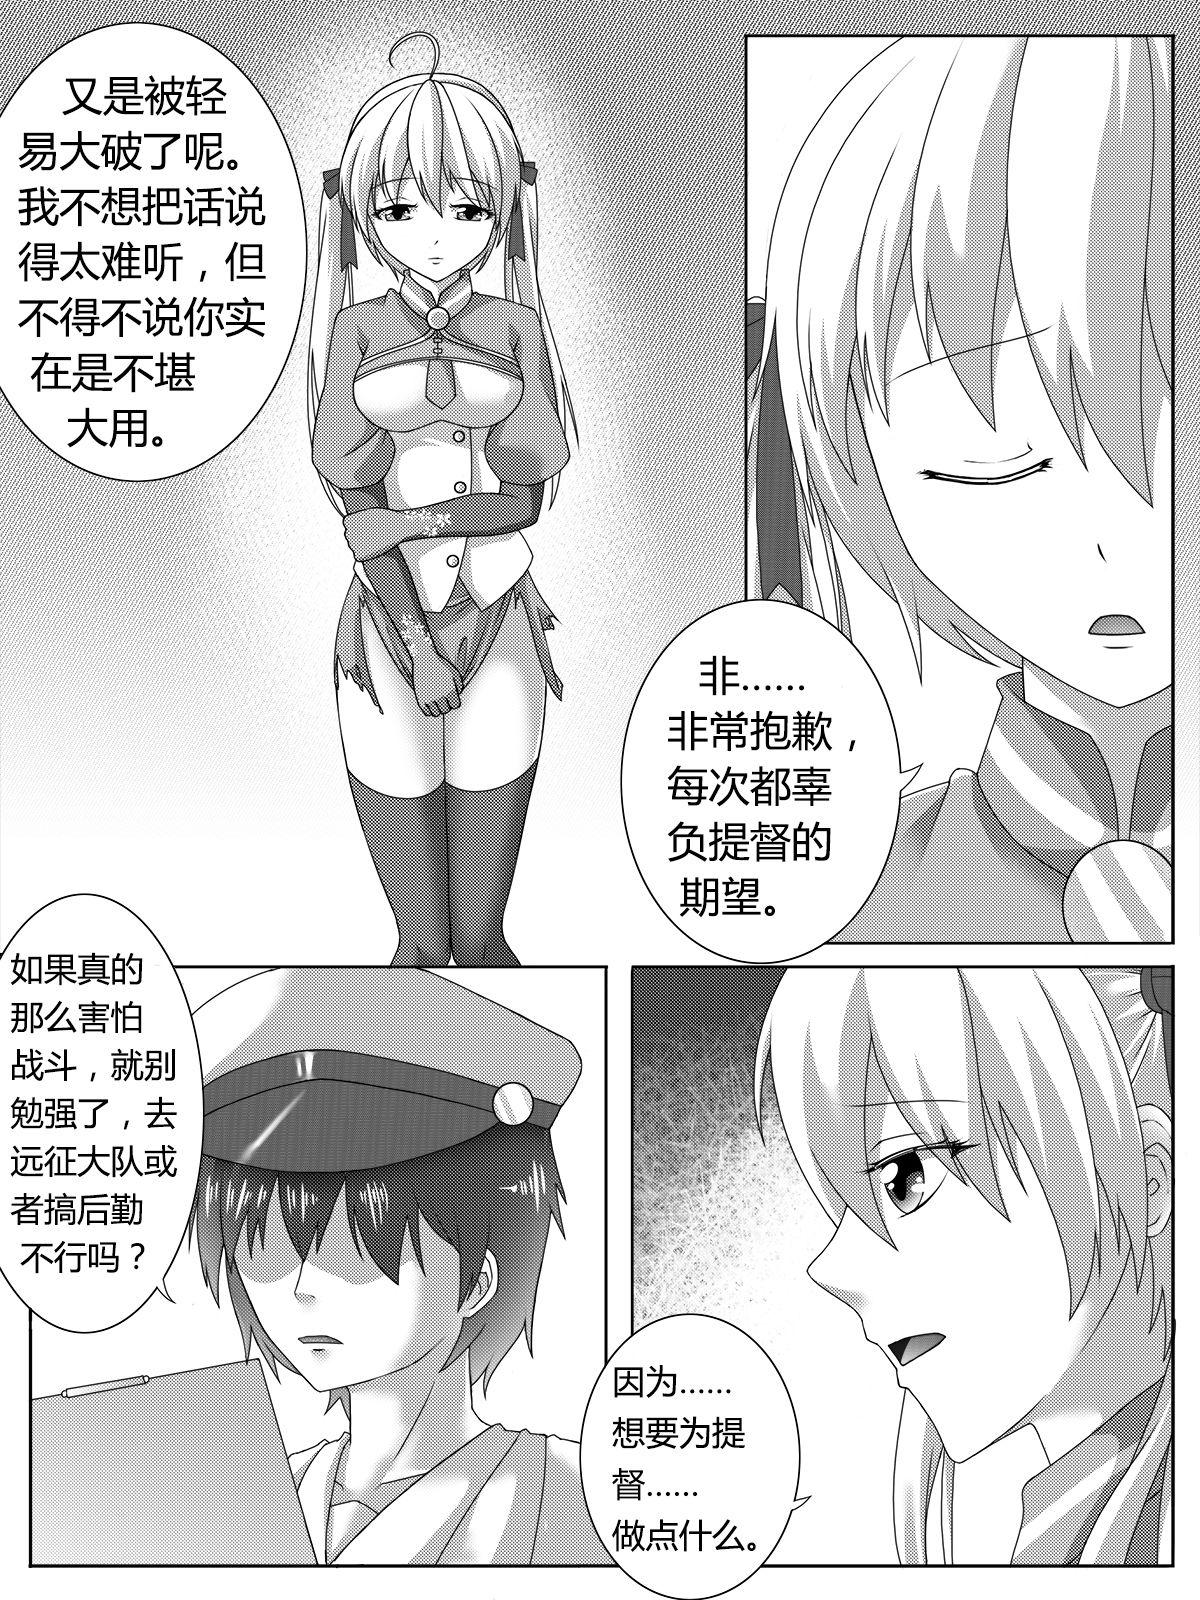 Stretching Punishment of Ooyodo's Heavily Damage - Warship girls Pure 18 - Page 3